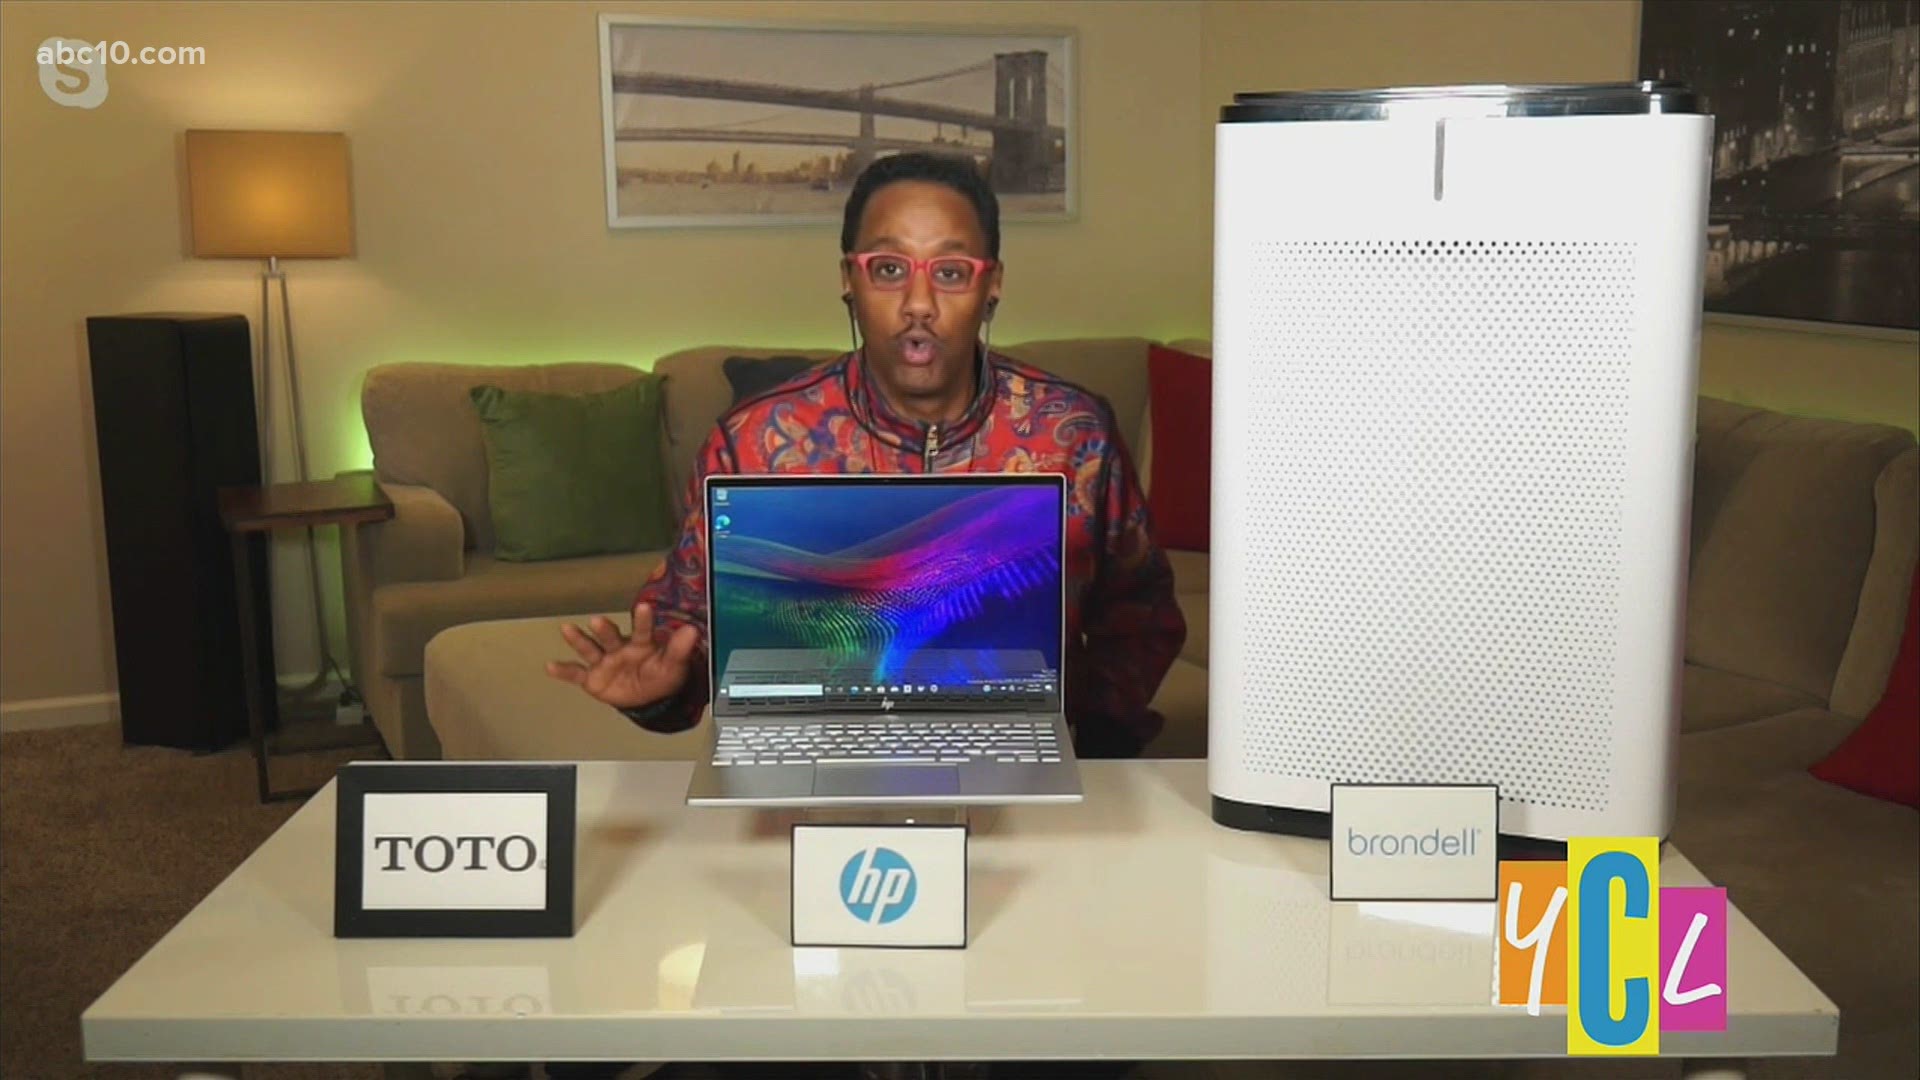 It’s the second day of the Consumer Electronics Show and Mario Armstrong shows us the hottest new laptops, innovations in smart home tech and more.